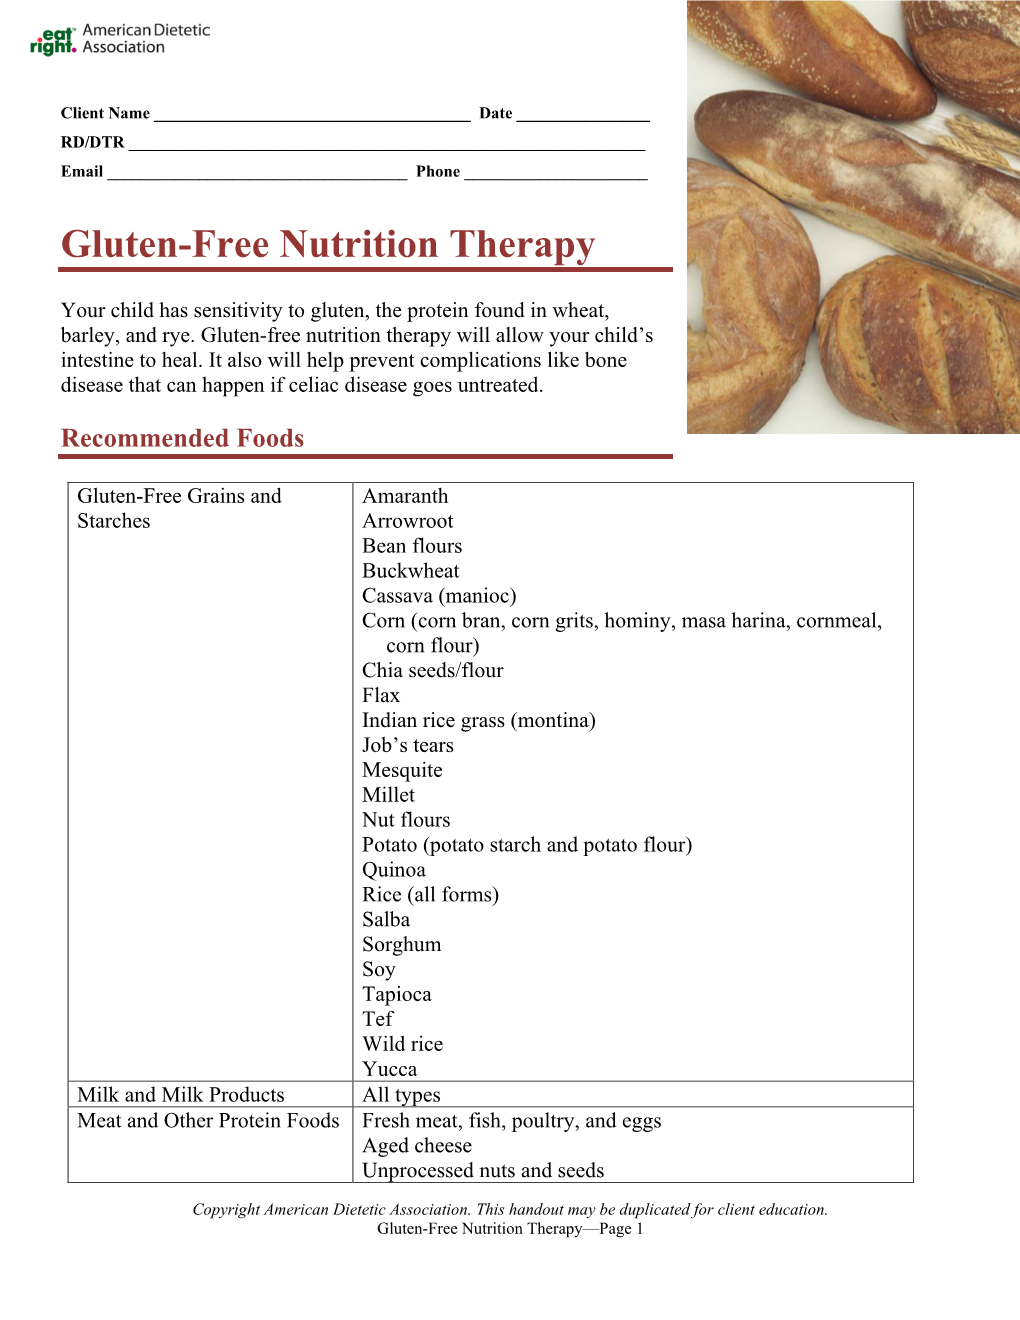 Gluten-Free Nutrition Therapy